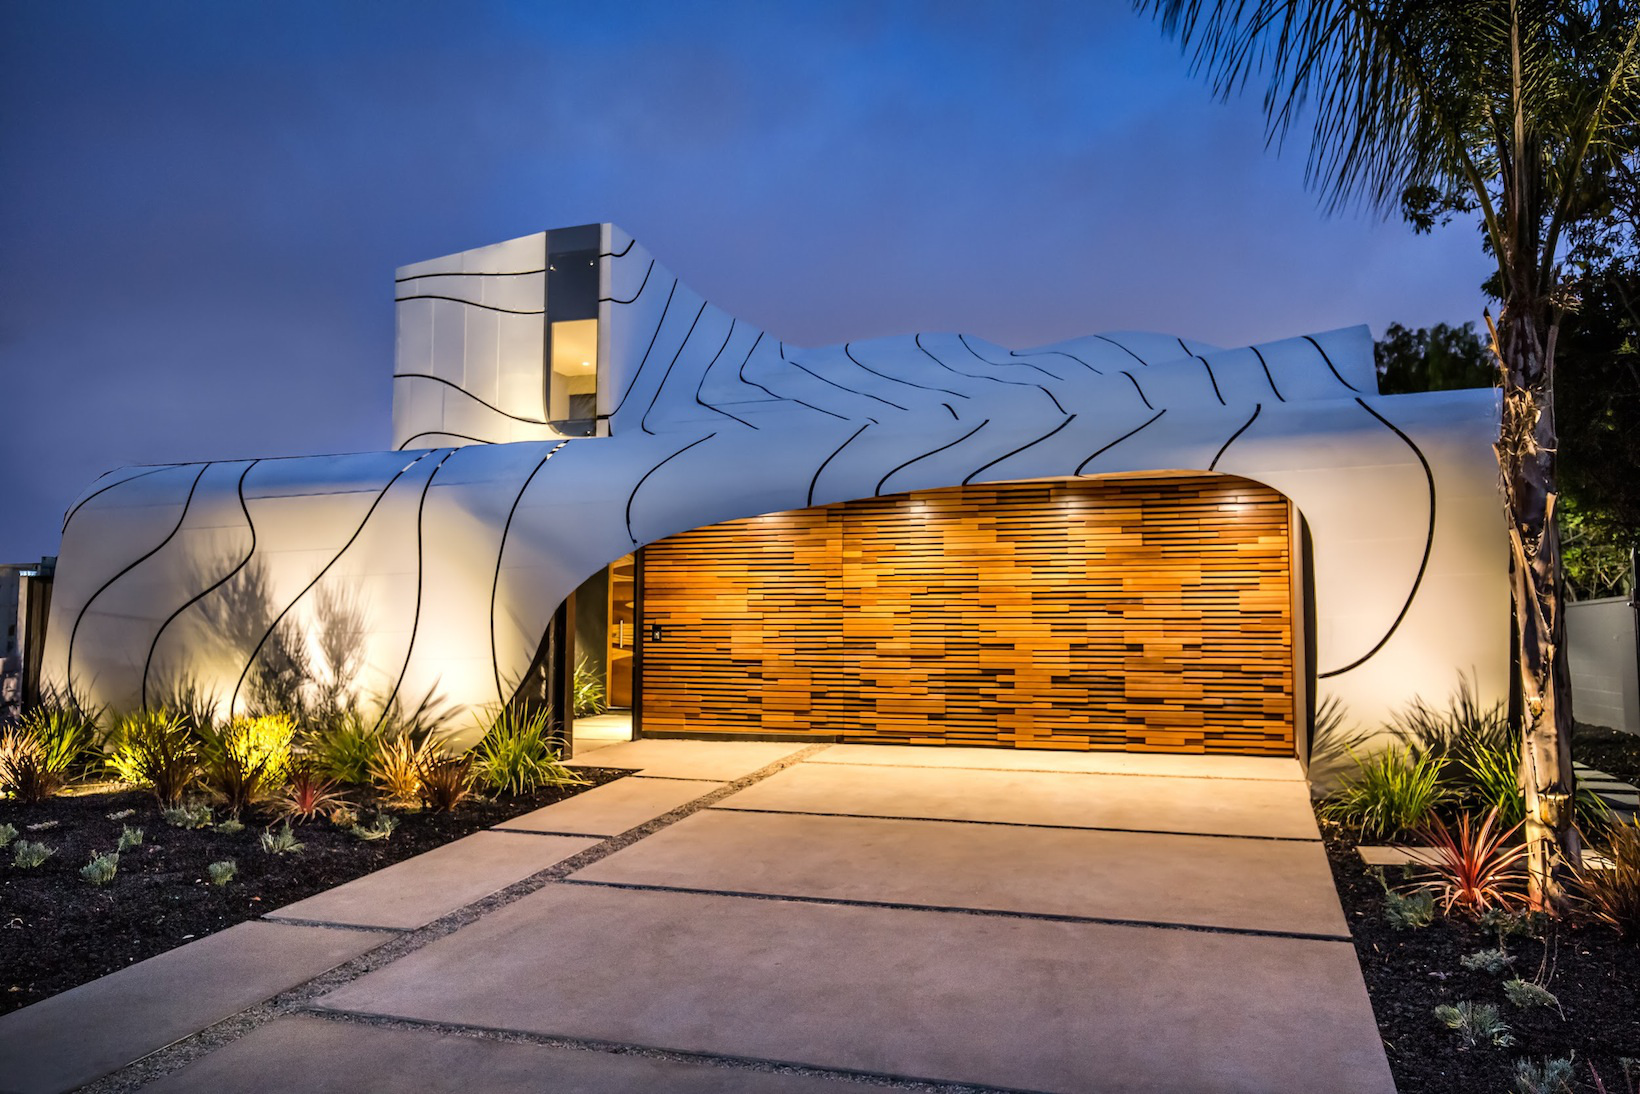 This unique Wave House by architect Mario Romano in inspired by the ocean waves and looks fantastic